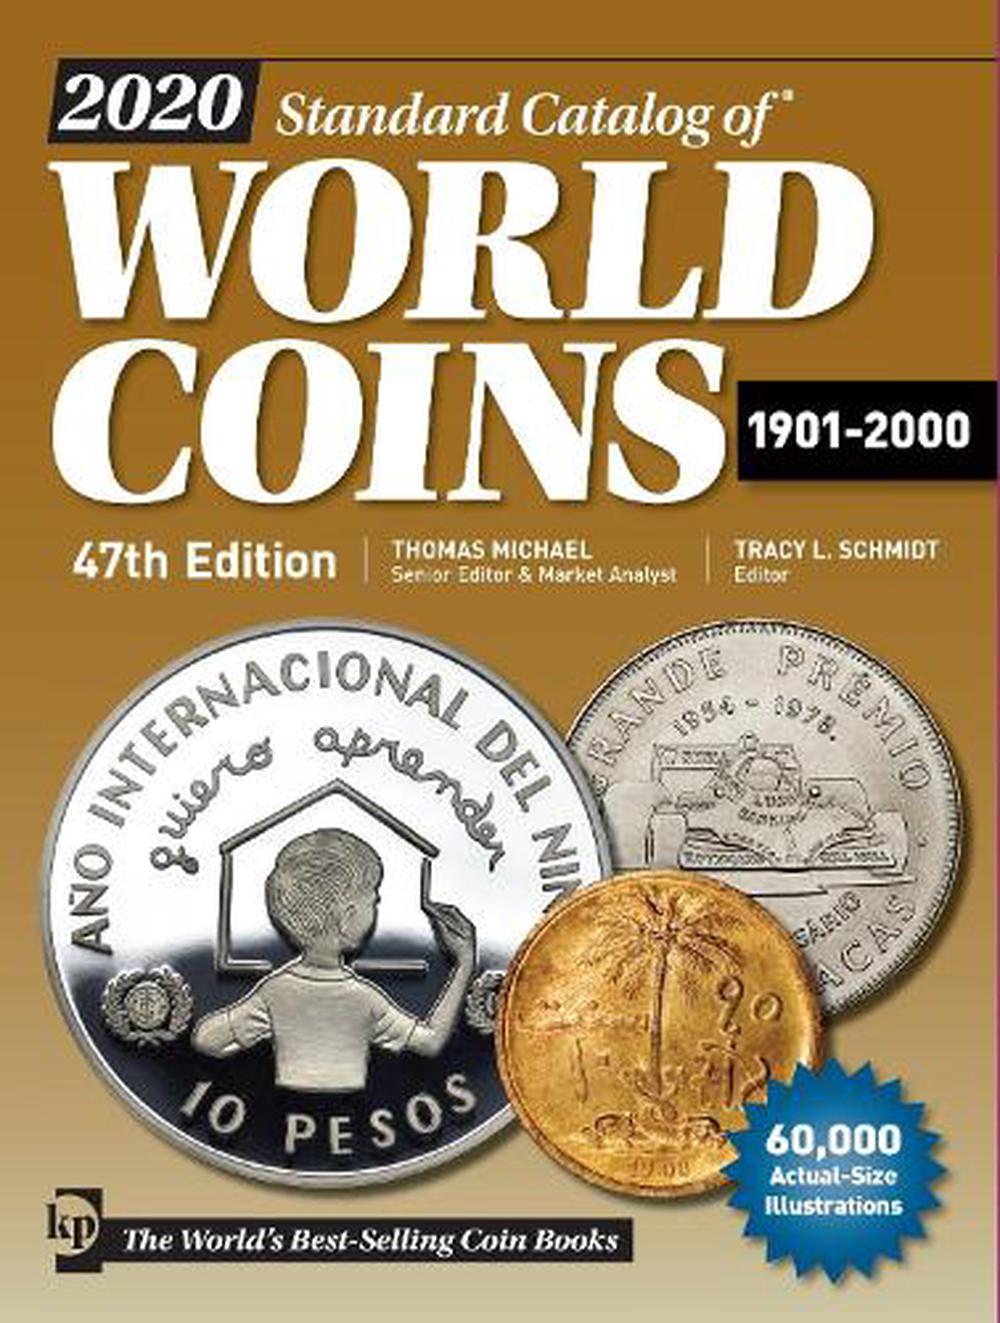 2020 Standard Catalog of World Coins, 19012000 by T. Michael Paperback